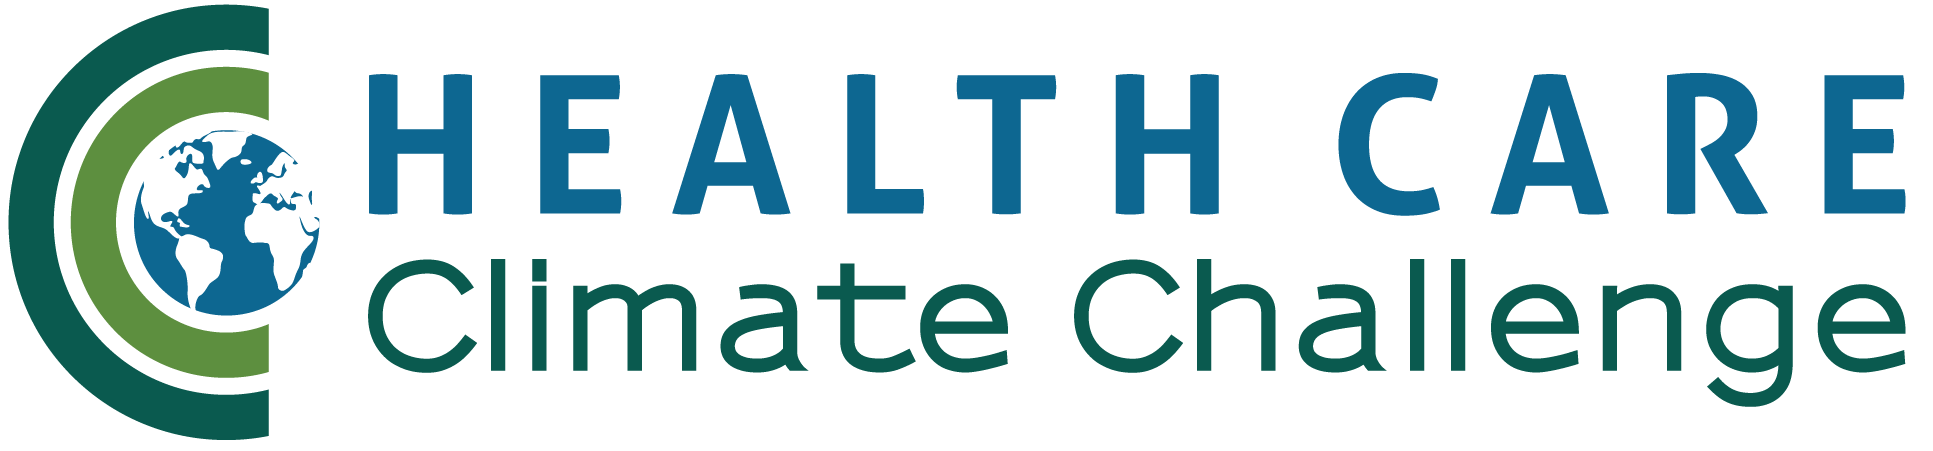 Health Care Climate Challenge logo graphic